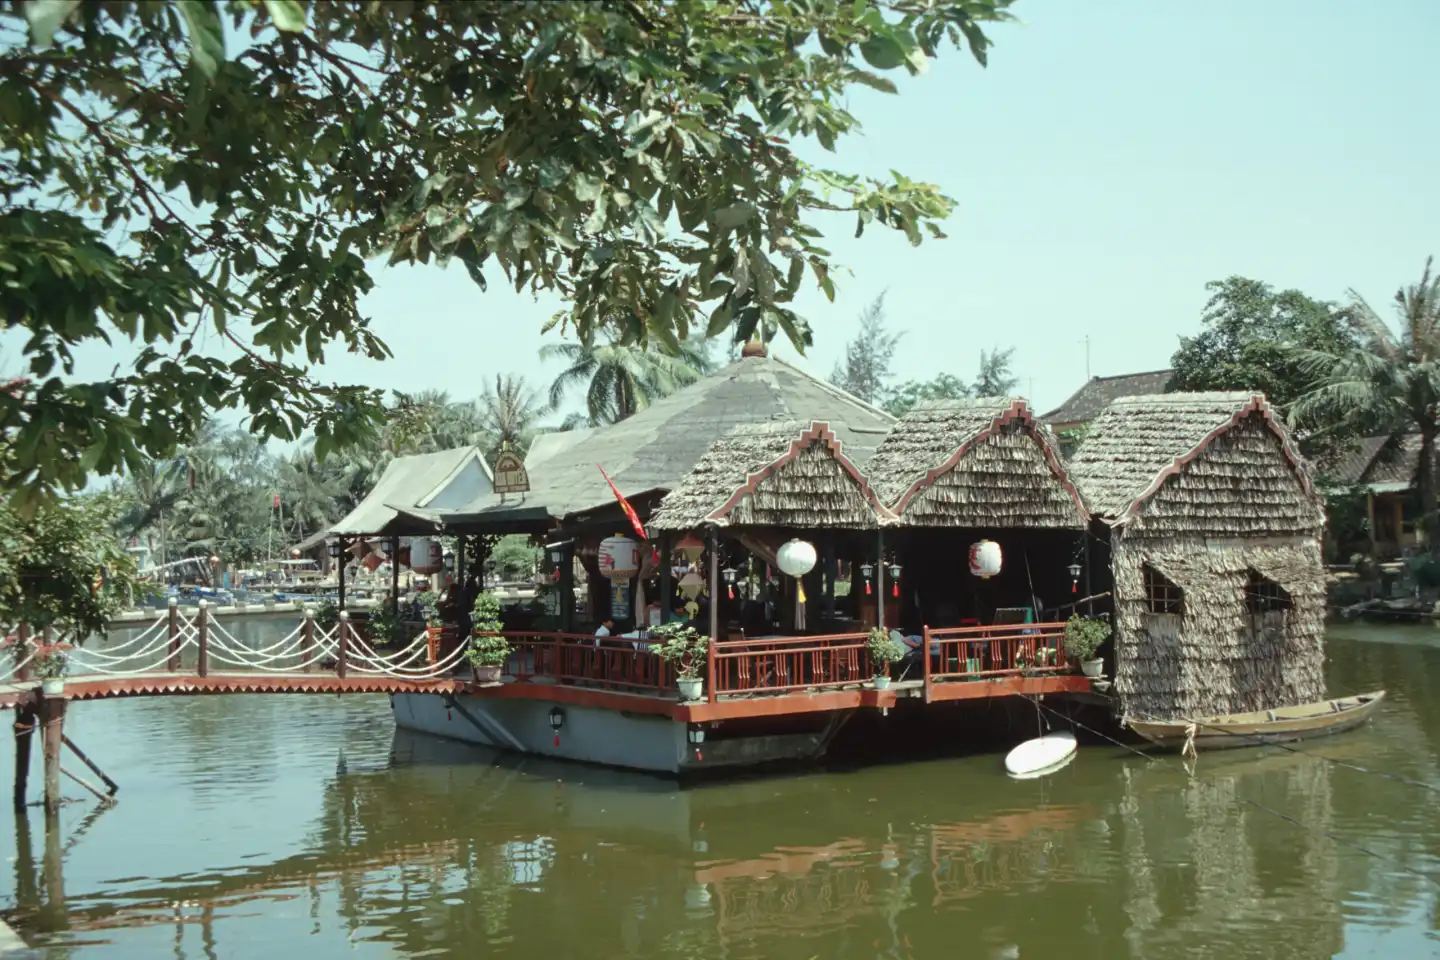 Swimming restaurant in the Hoi An river